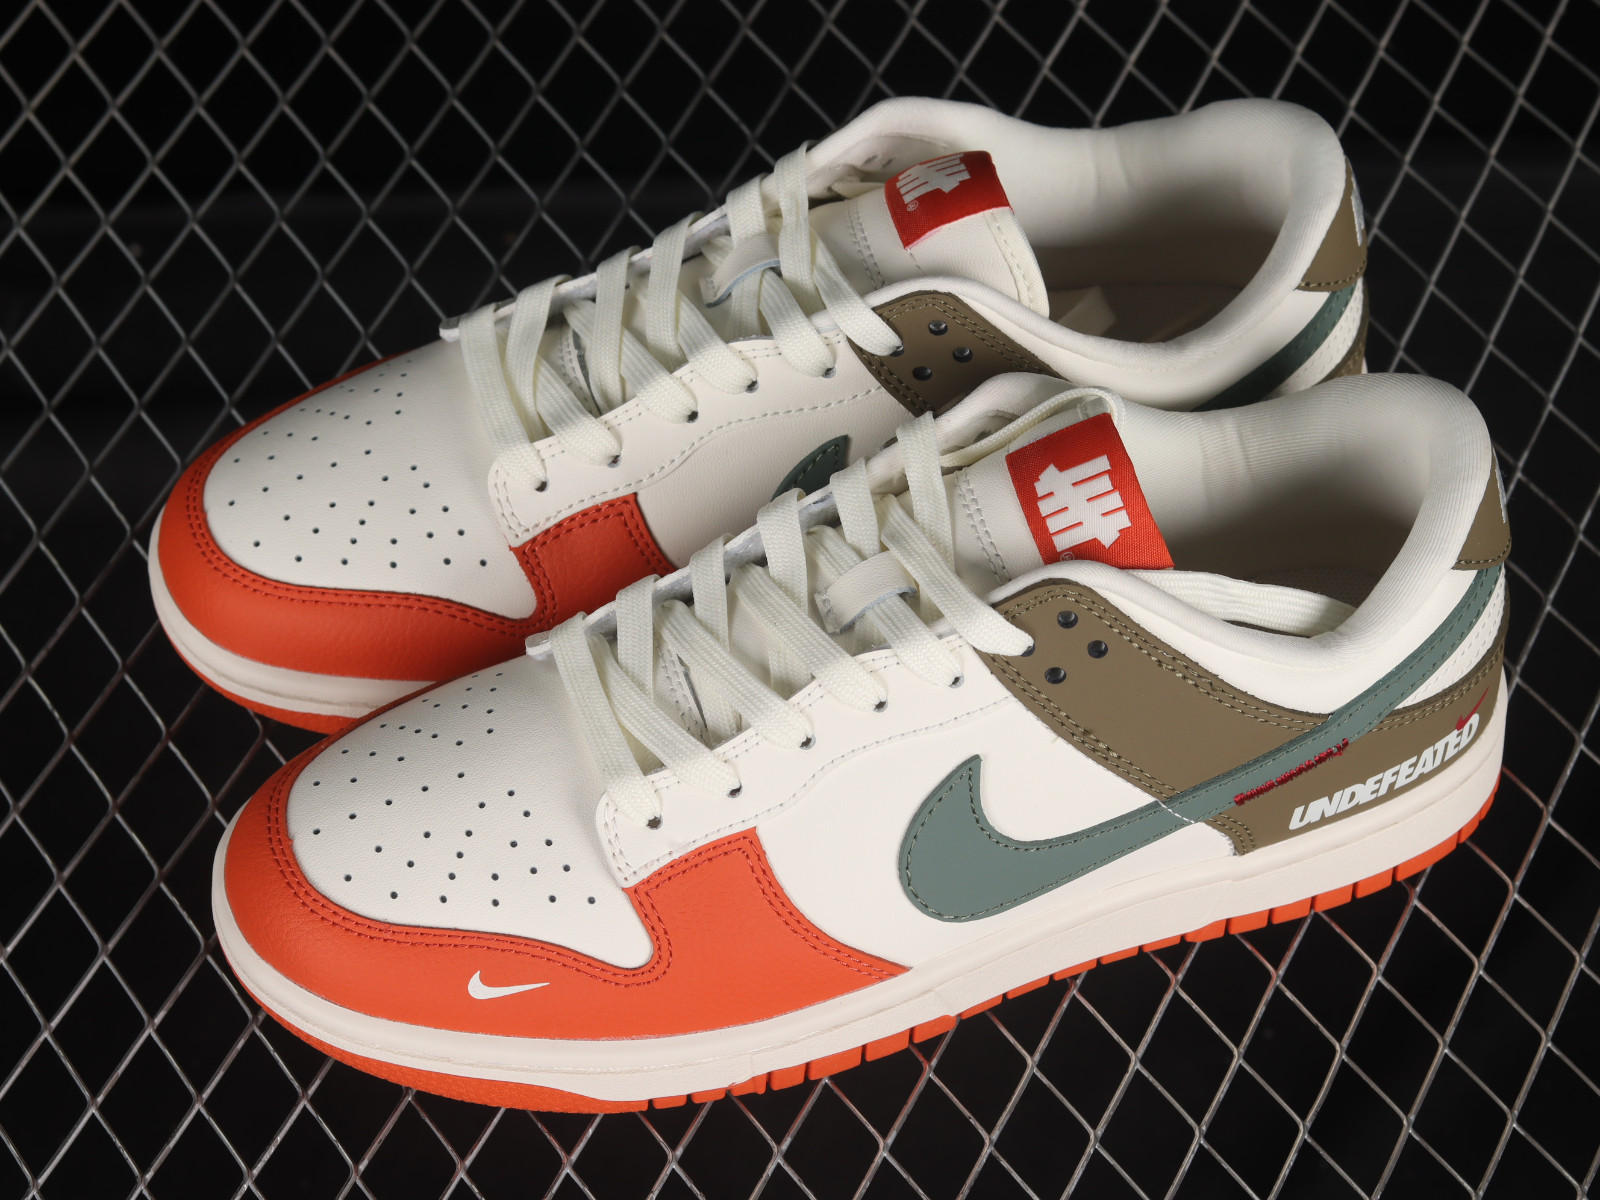 Winst experimenteel lokaal Nike SB Dunk Low GS Beige Orange Green FC1688 - 500 -  MultiscaleconsultingShops - fashion nike air vapormax 360 metallic gold  running shoes